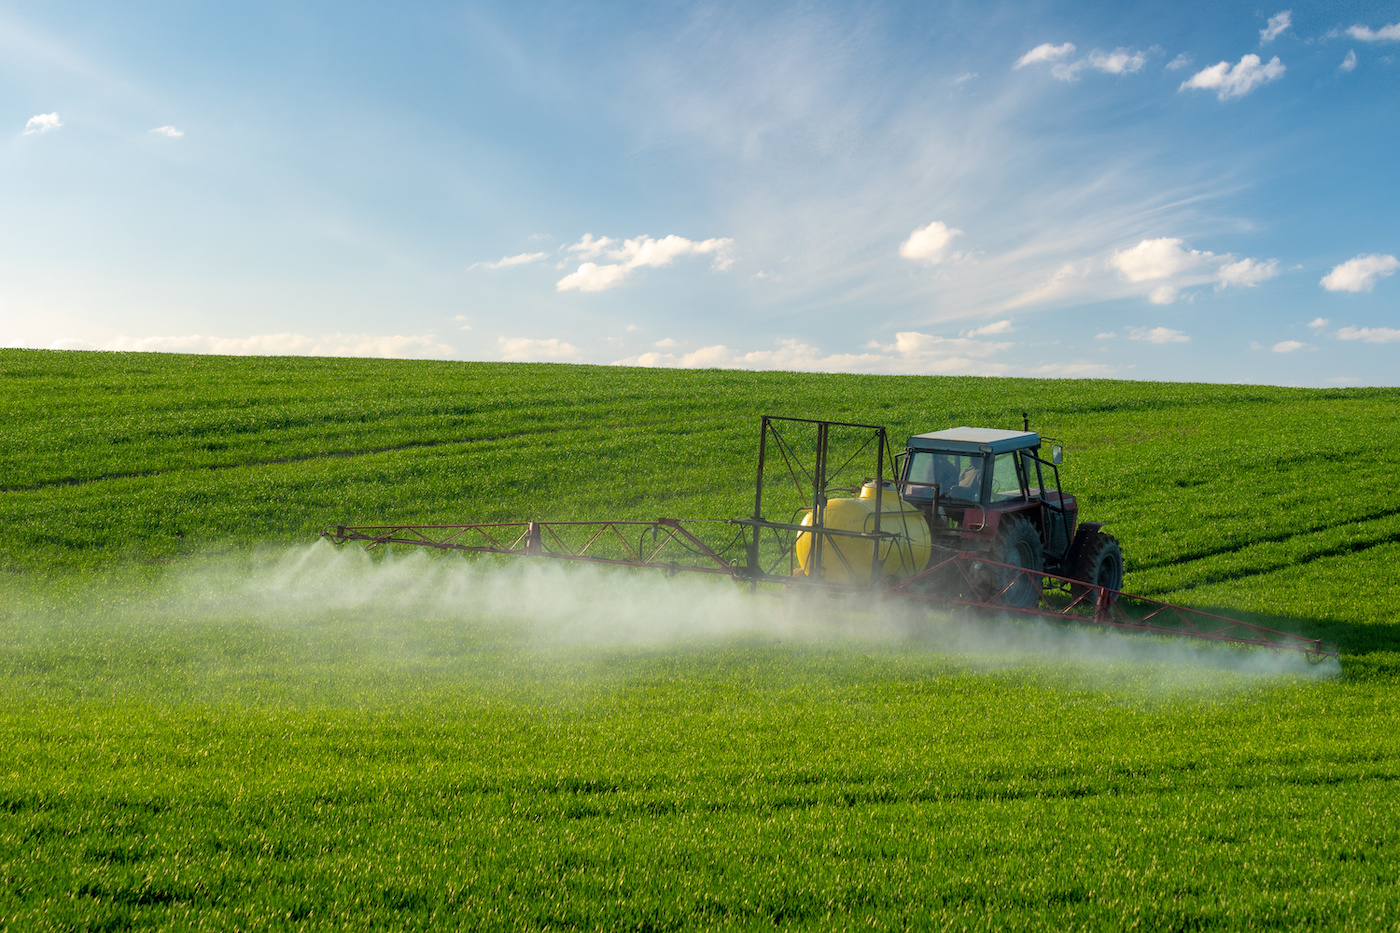 A tractor is driving through a wheat field and spraying pesticides behind it.